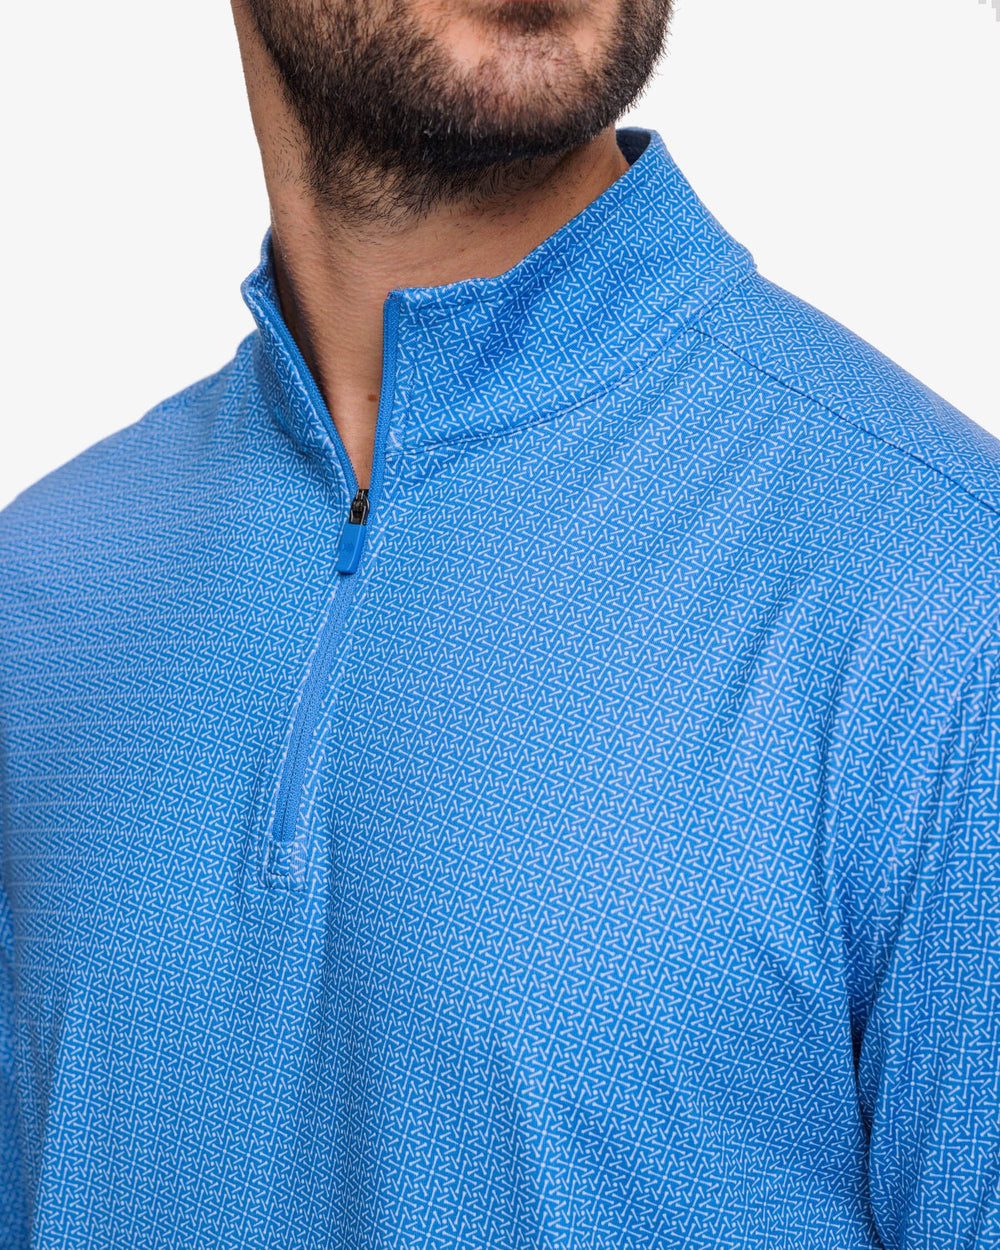 The detail view of the Southern Tide Pine Ridge Print Cruiser Quarter Zip Pullover by Southern Tide - Atlantic Blue